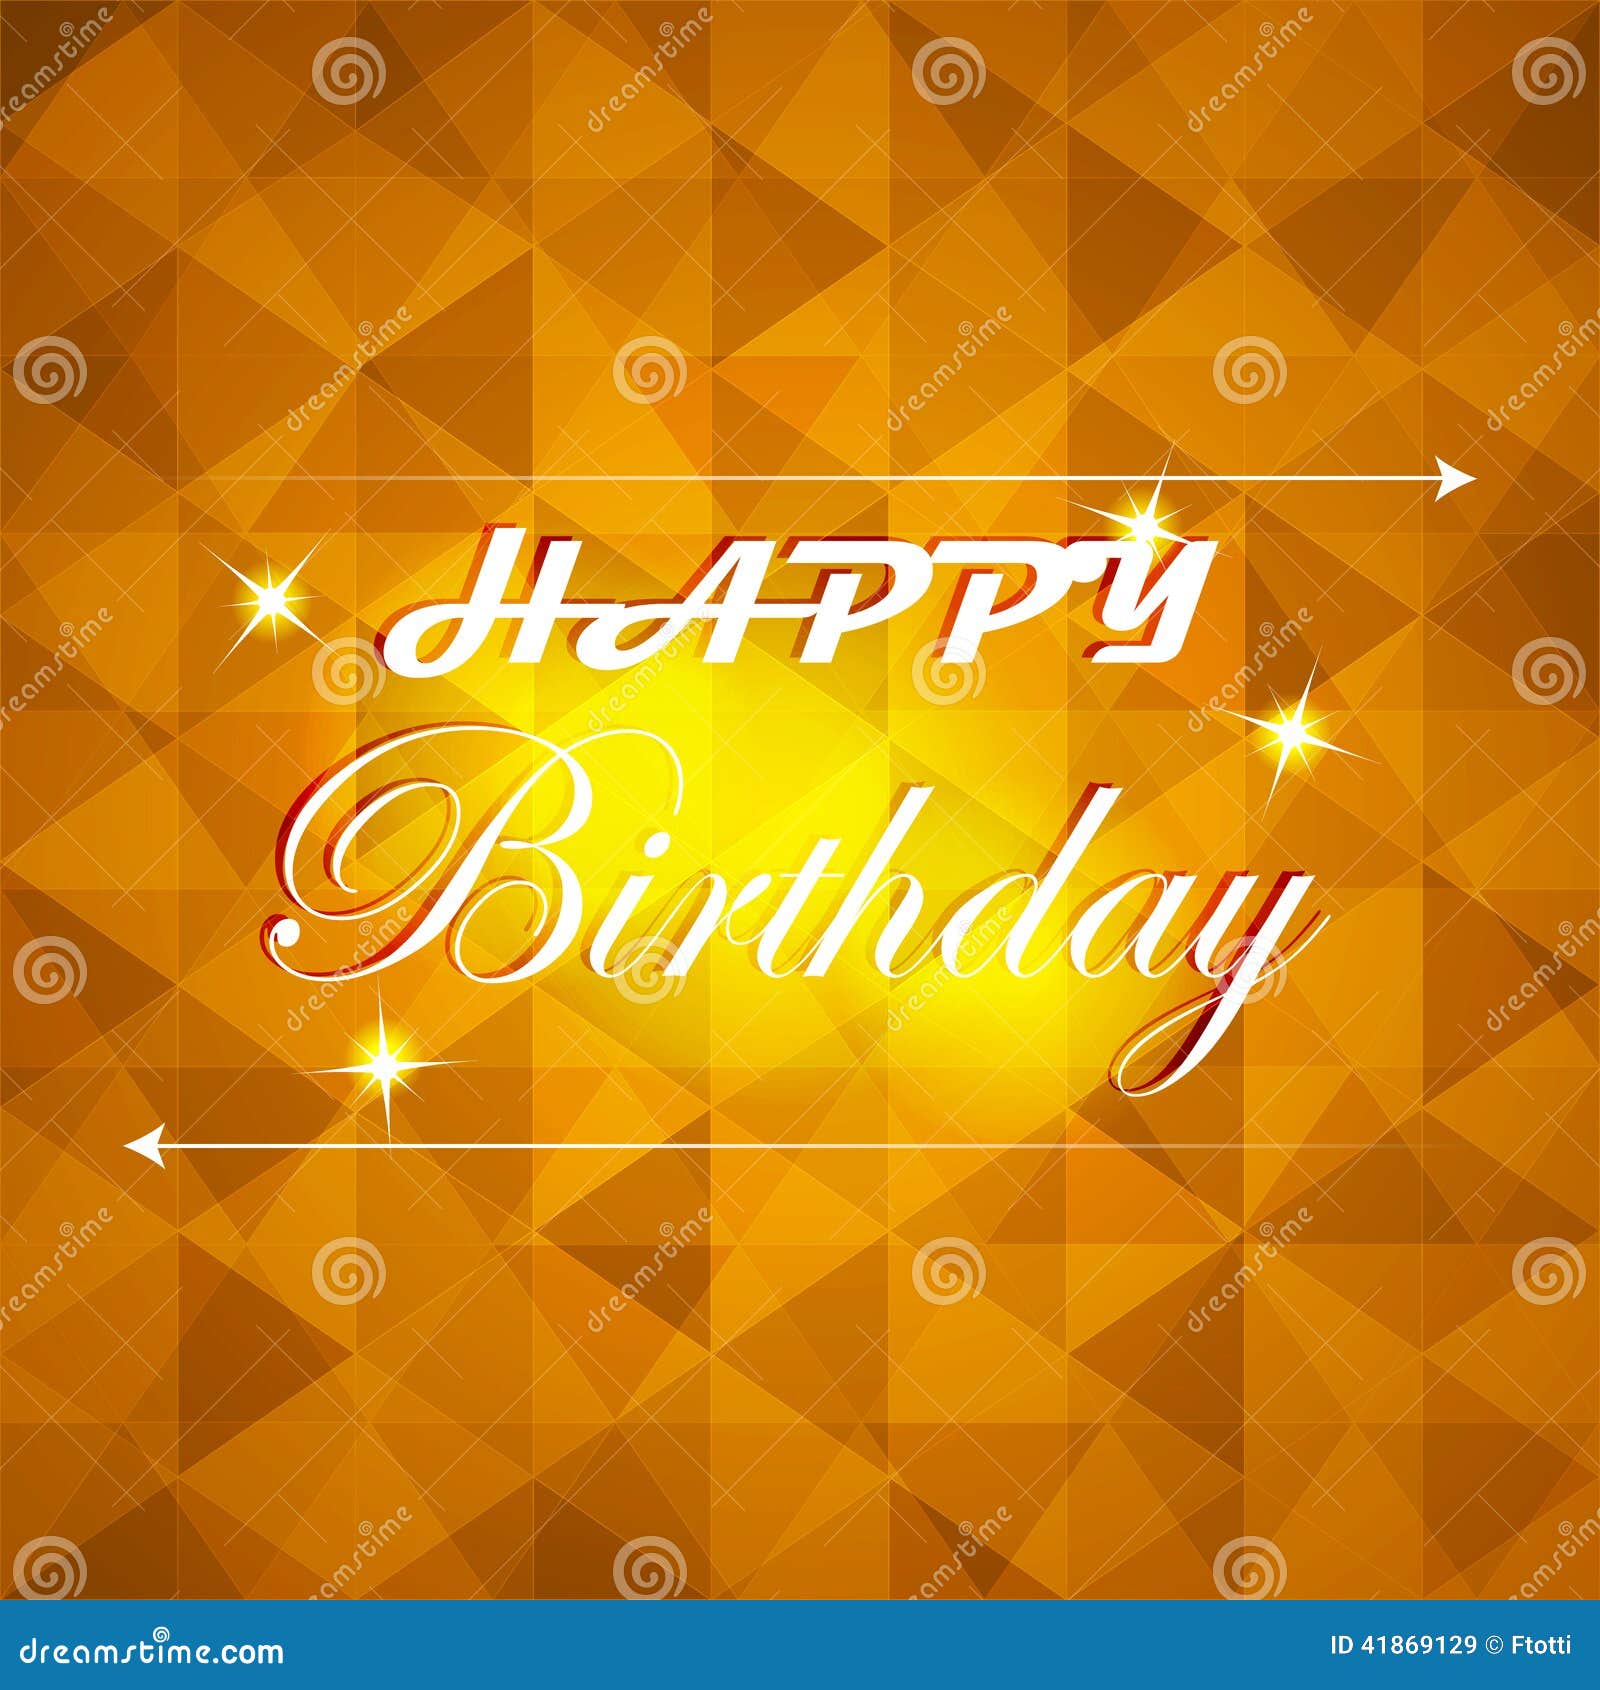 Happy Birthday Illustration with Light on the Background Stock Vector -  Illustration of decorative, light: 41869129